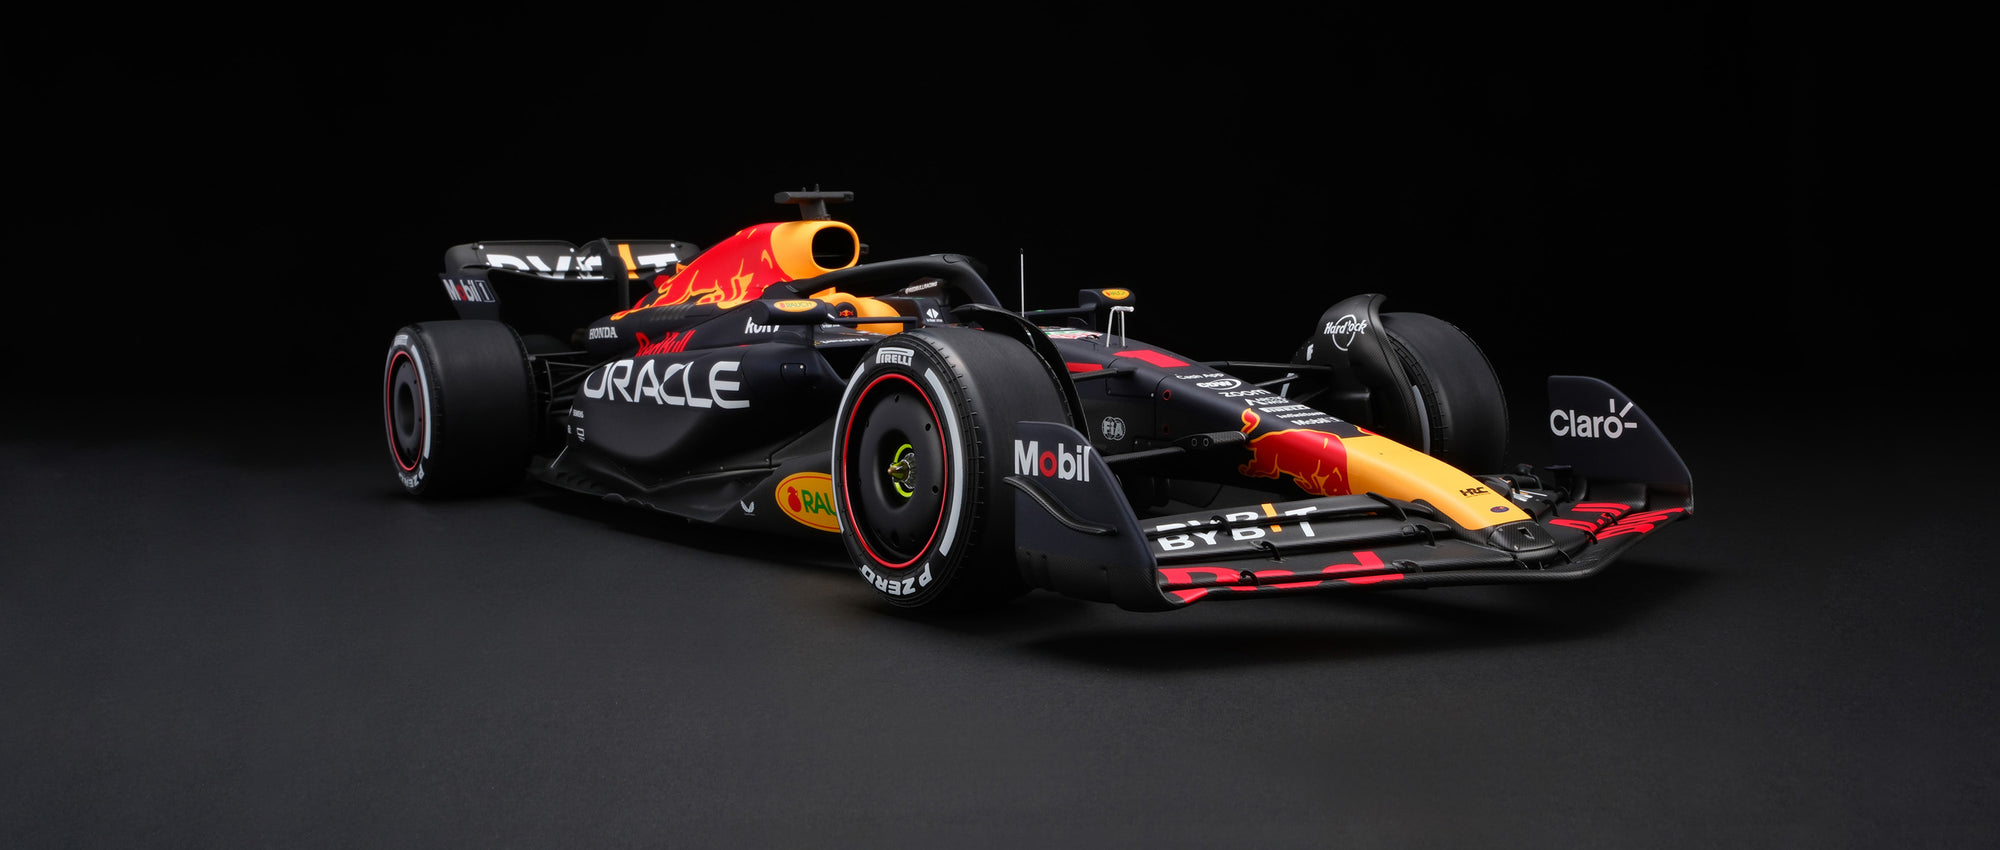 2023 F1 Car Model Red Bull Racing Rb19 With Showcase 1:43 Scale